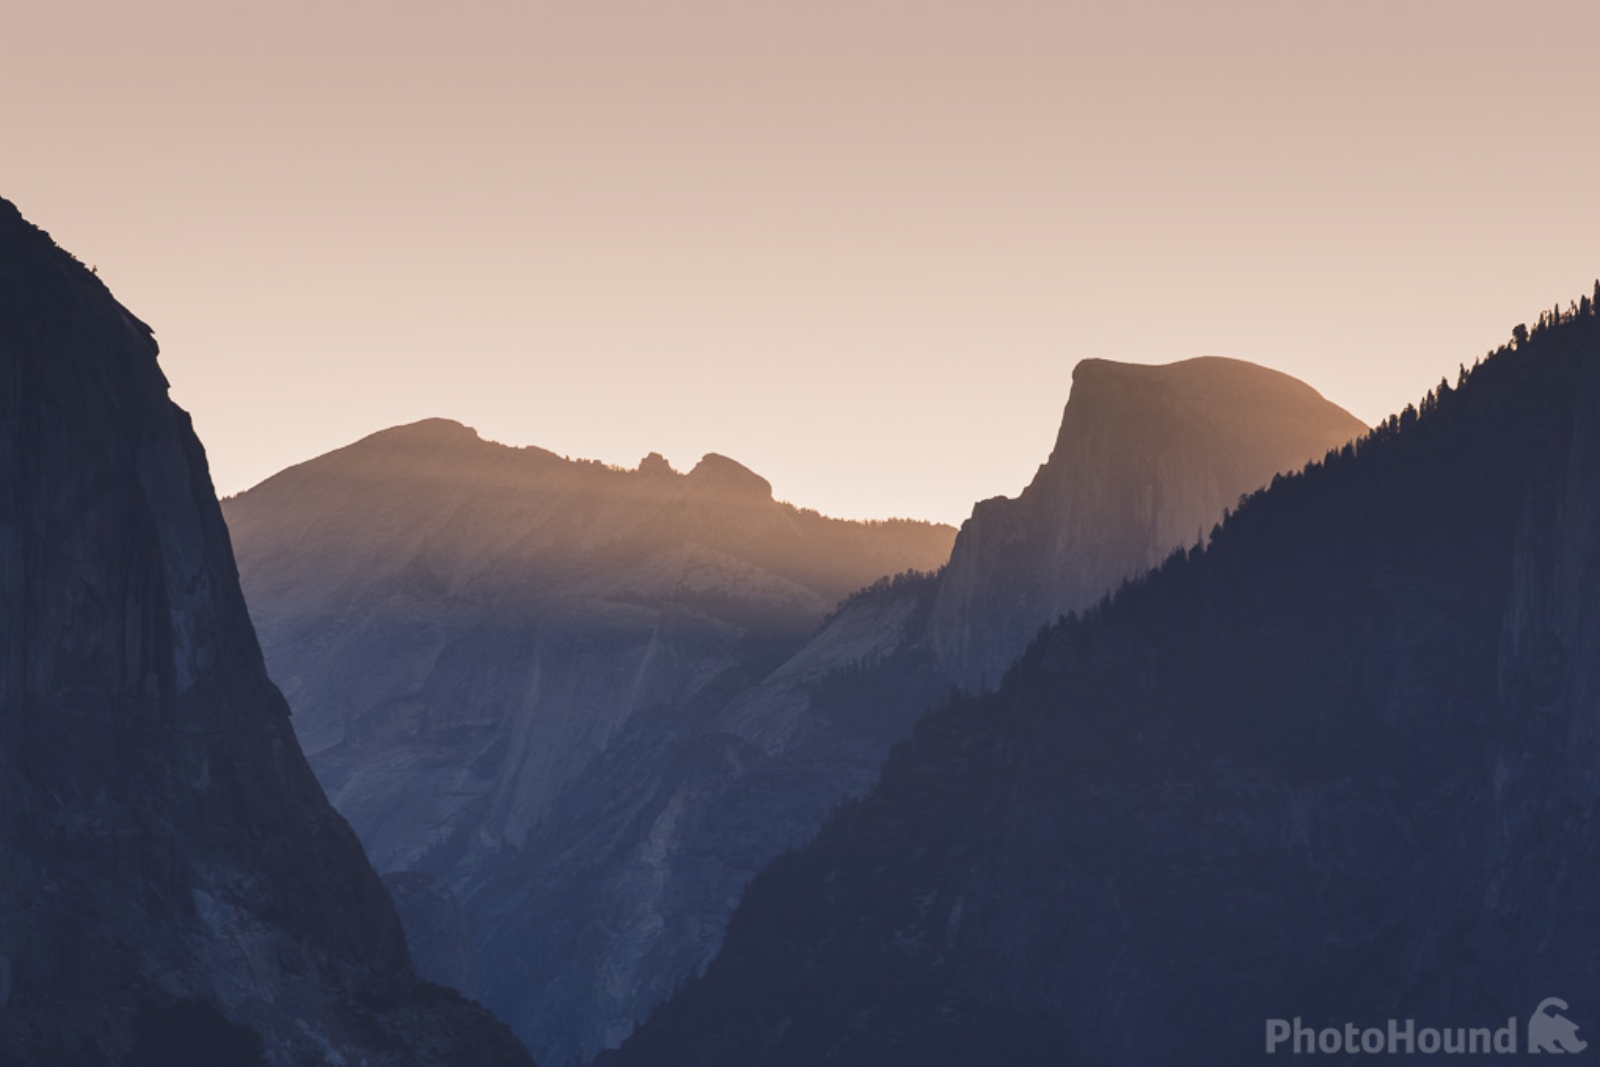 Image of Yosemite Valley (Tunnel View) by Angelika Vieth